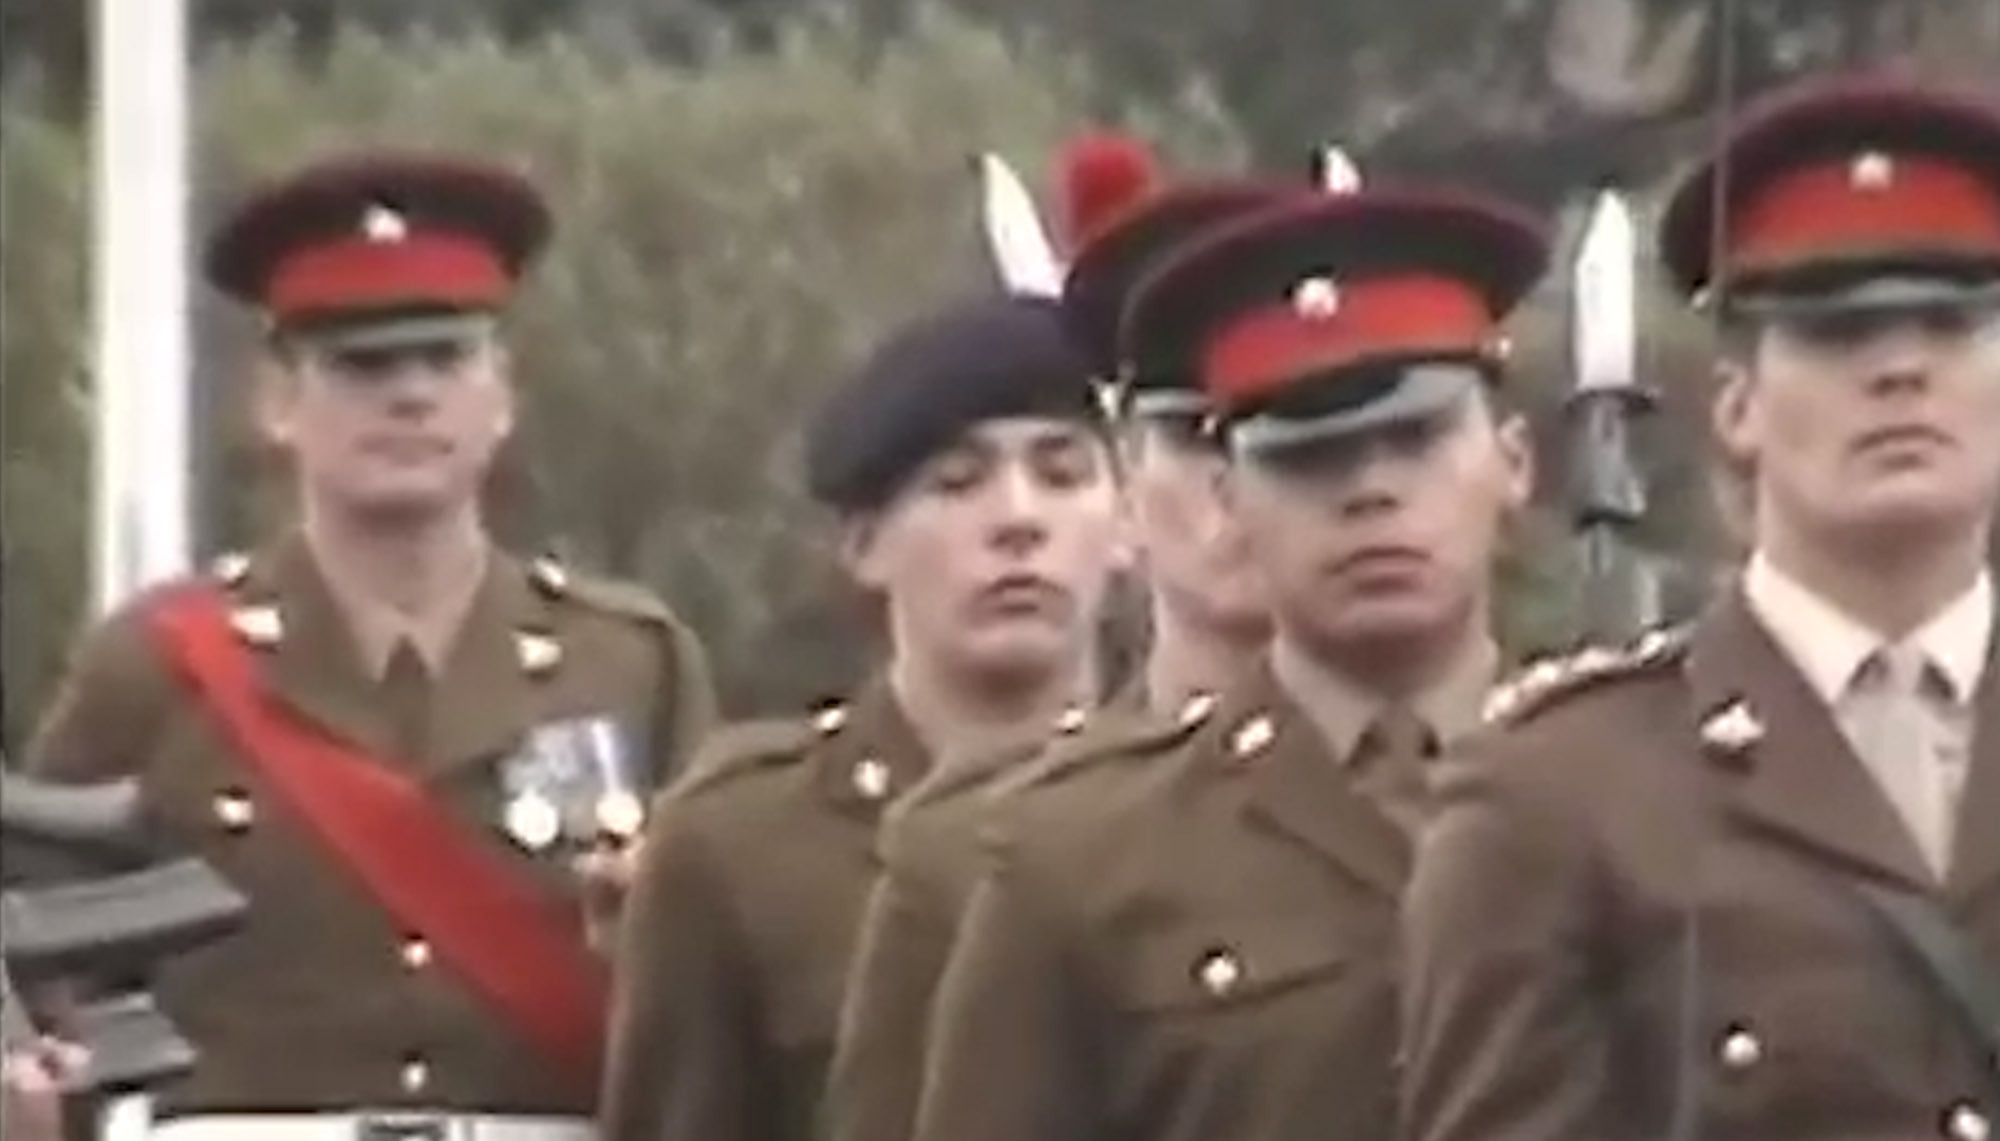 Family video of Fusilier Lee Rigby (centre).